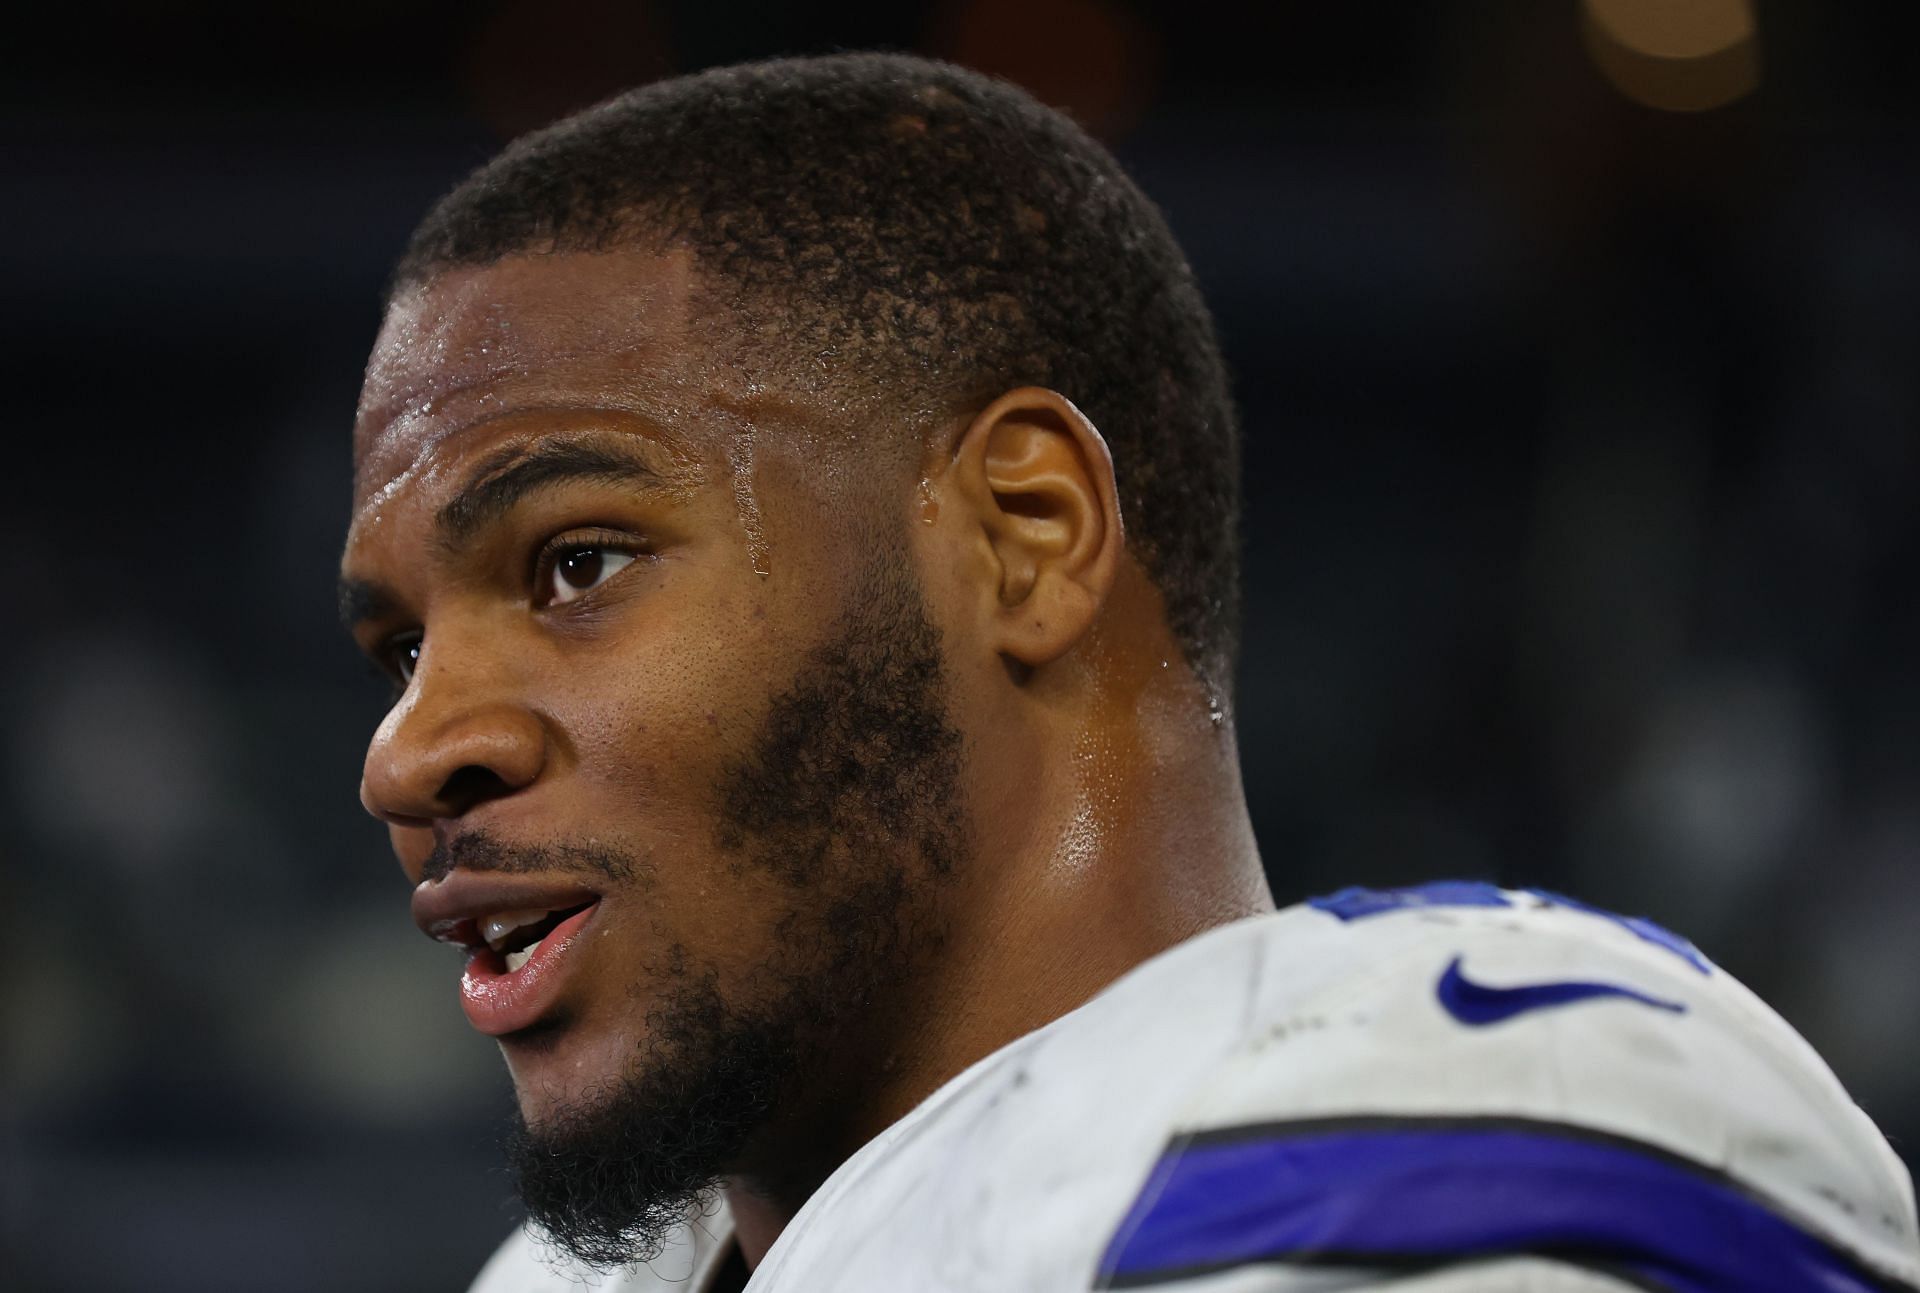 Cowboys' Micah Parsons defends wearing 76ers jersey to NBA playoff